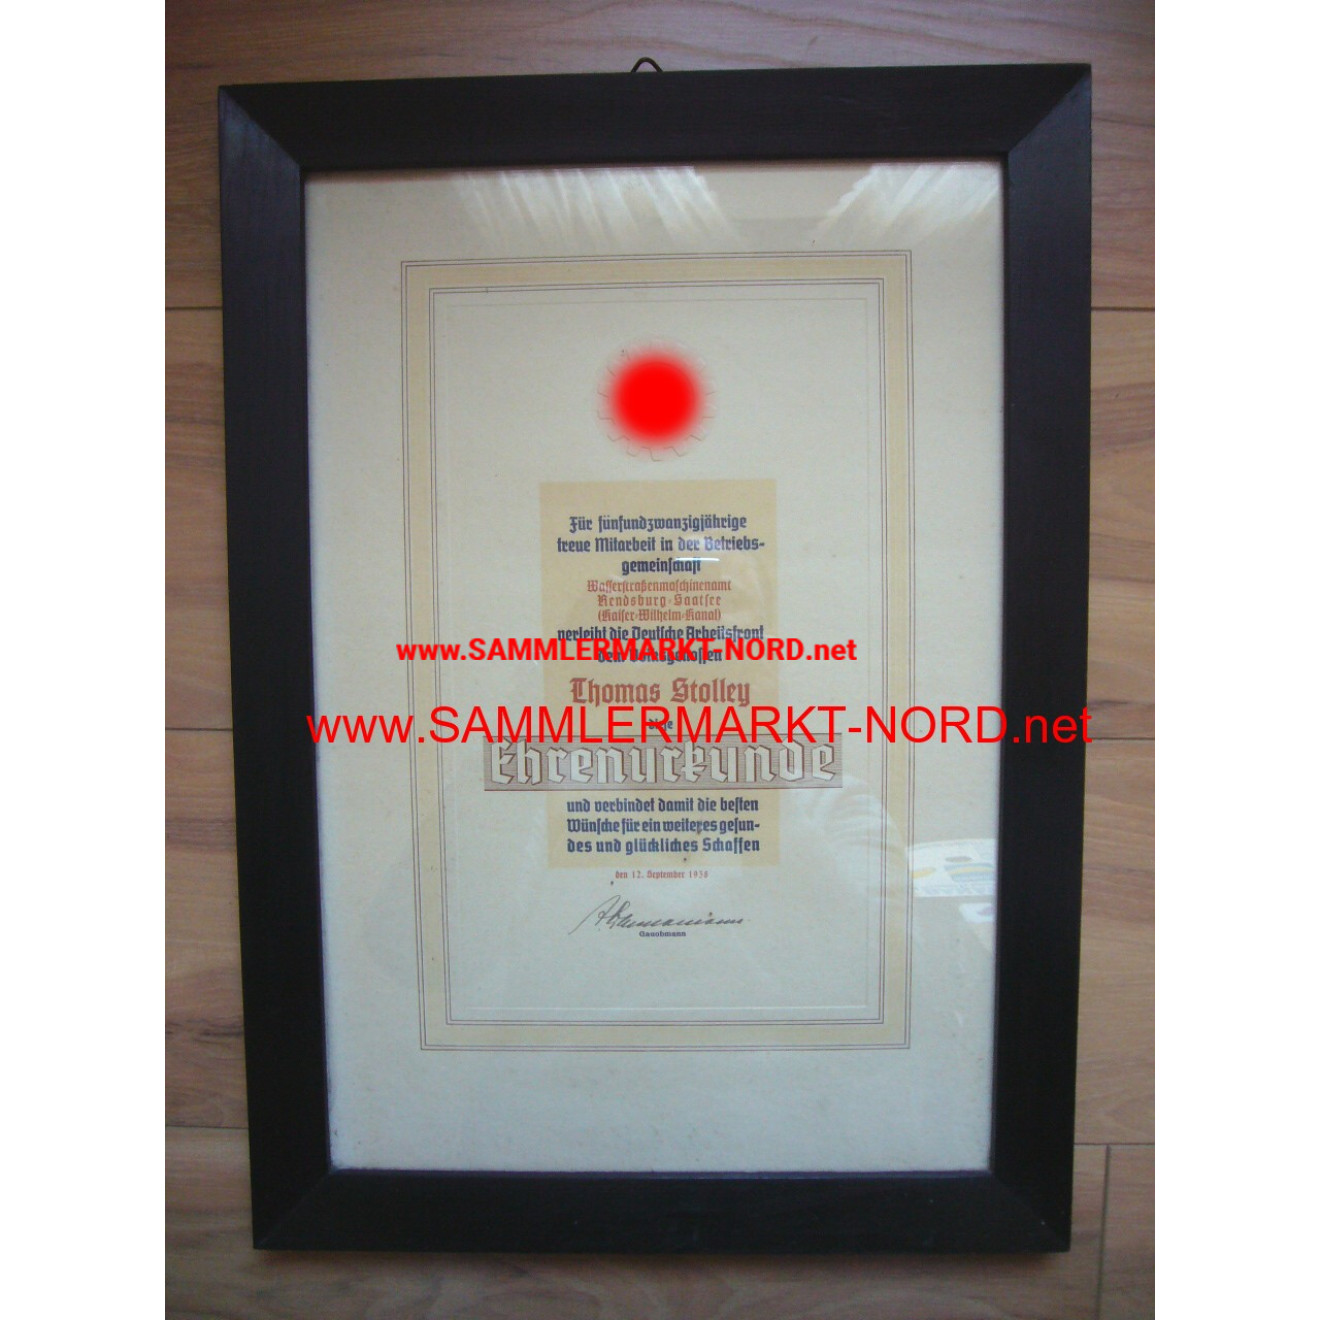 Large framed Honorary Diploma of the DAF - 25 years of work at t